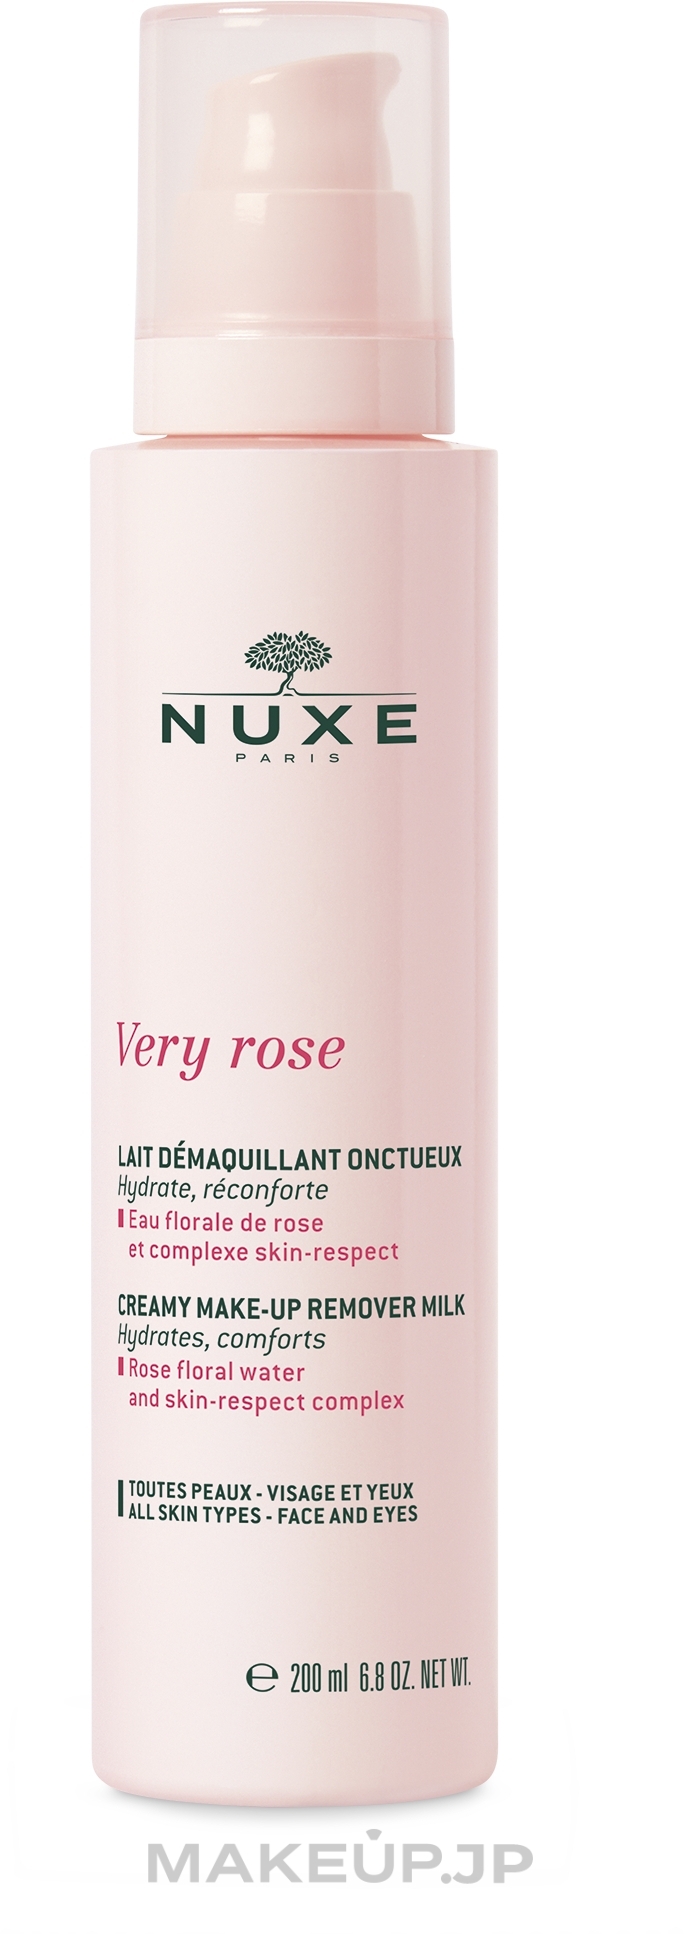 Delicate Makeup Remover Milk - Nuxe Very Rose Creamy Make-up Remover Milk — photo 200 ml